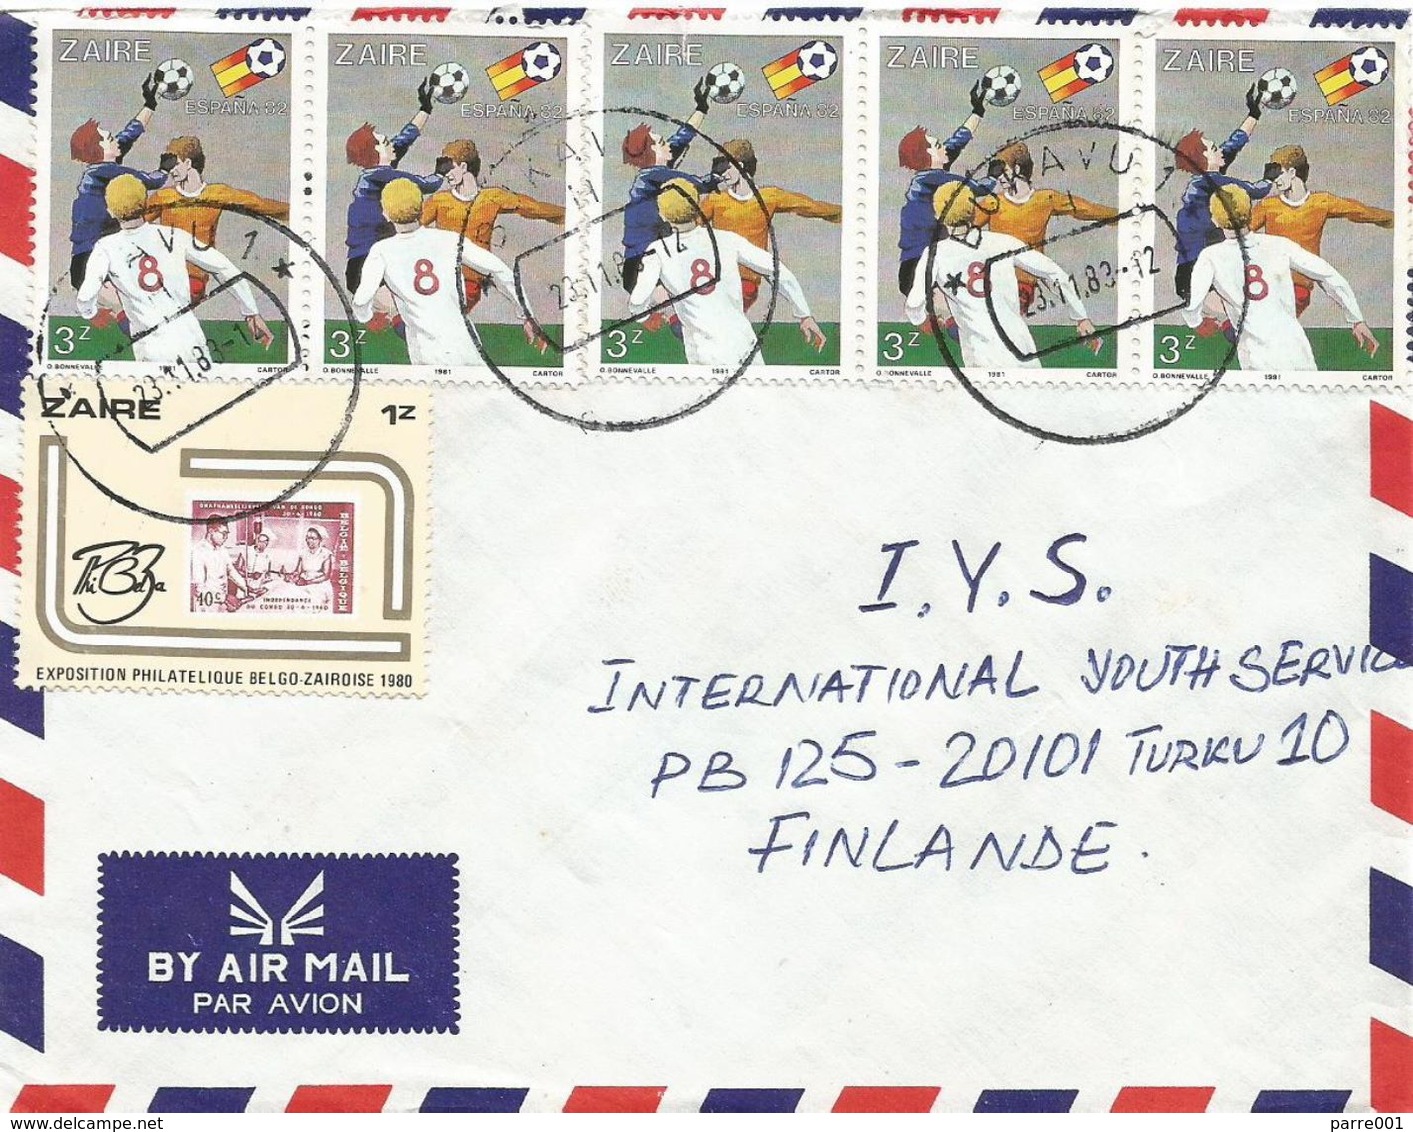 Zaire DRC Congo 1983 Bukavu World Cup Football Spain 3Z Stamp Exhibition Stamps On Stamps 1Z Cover - Gebruikt